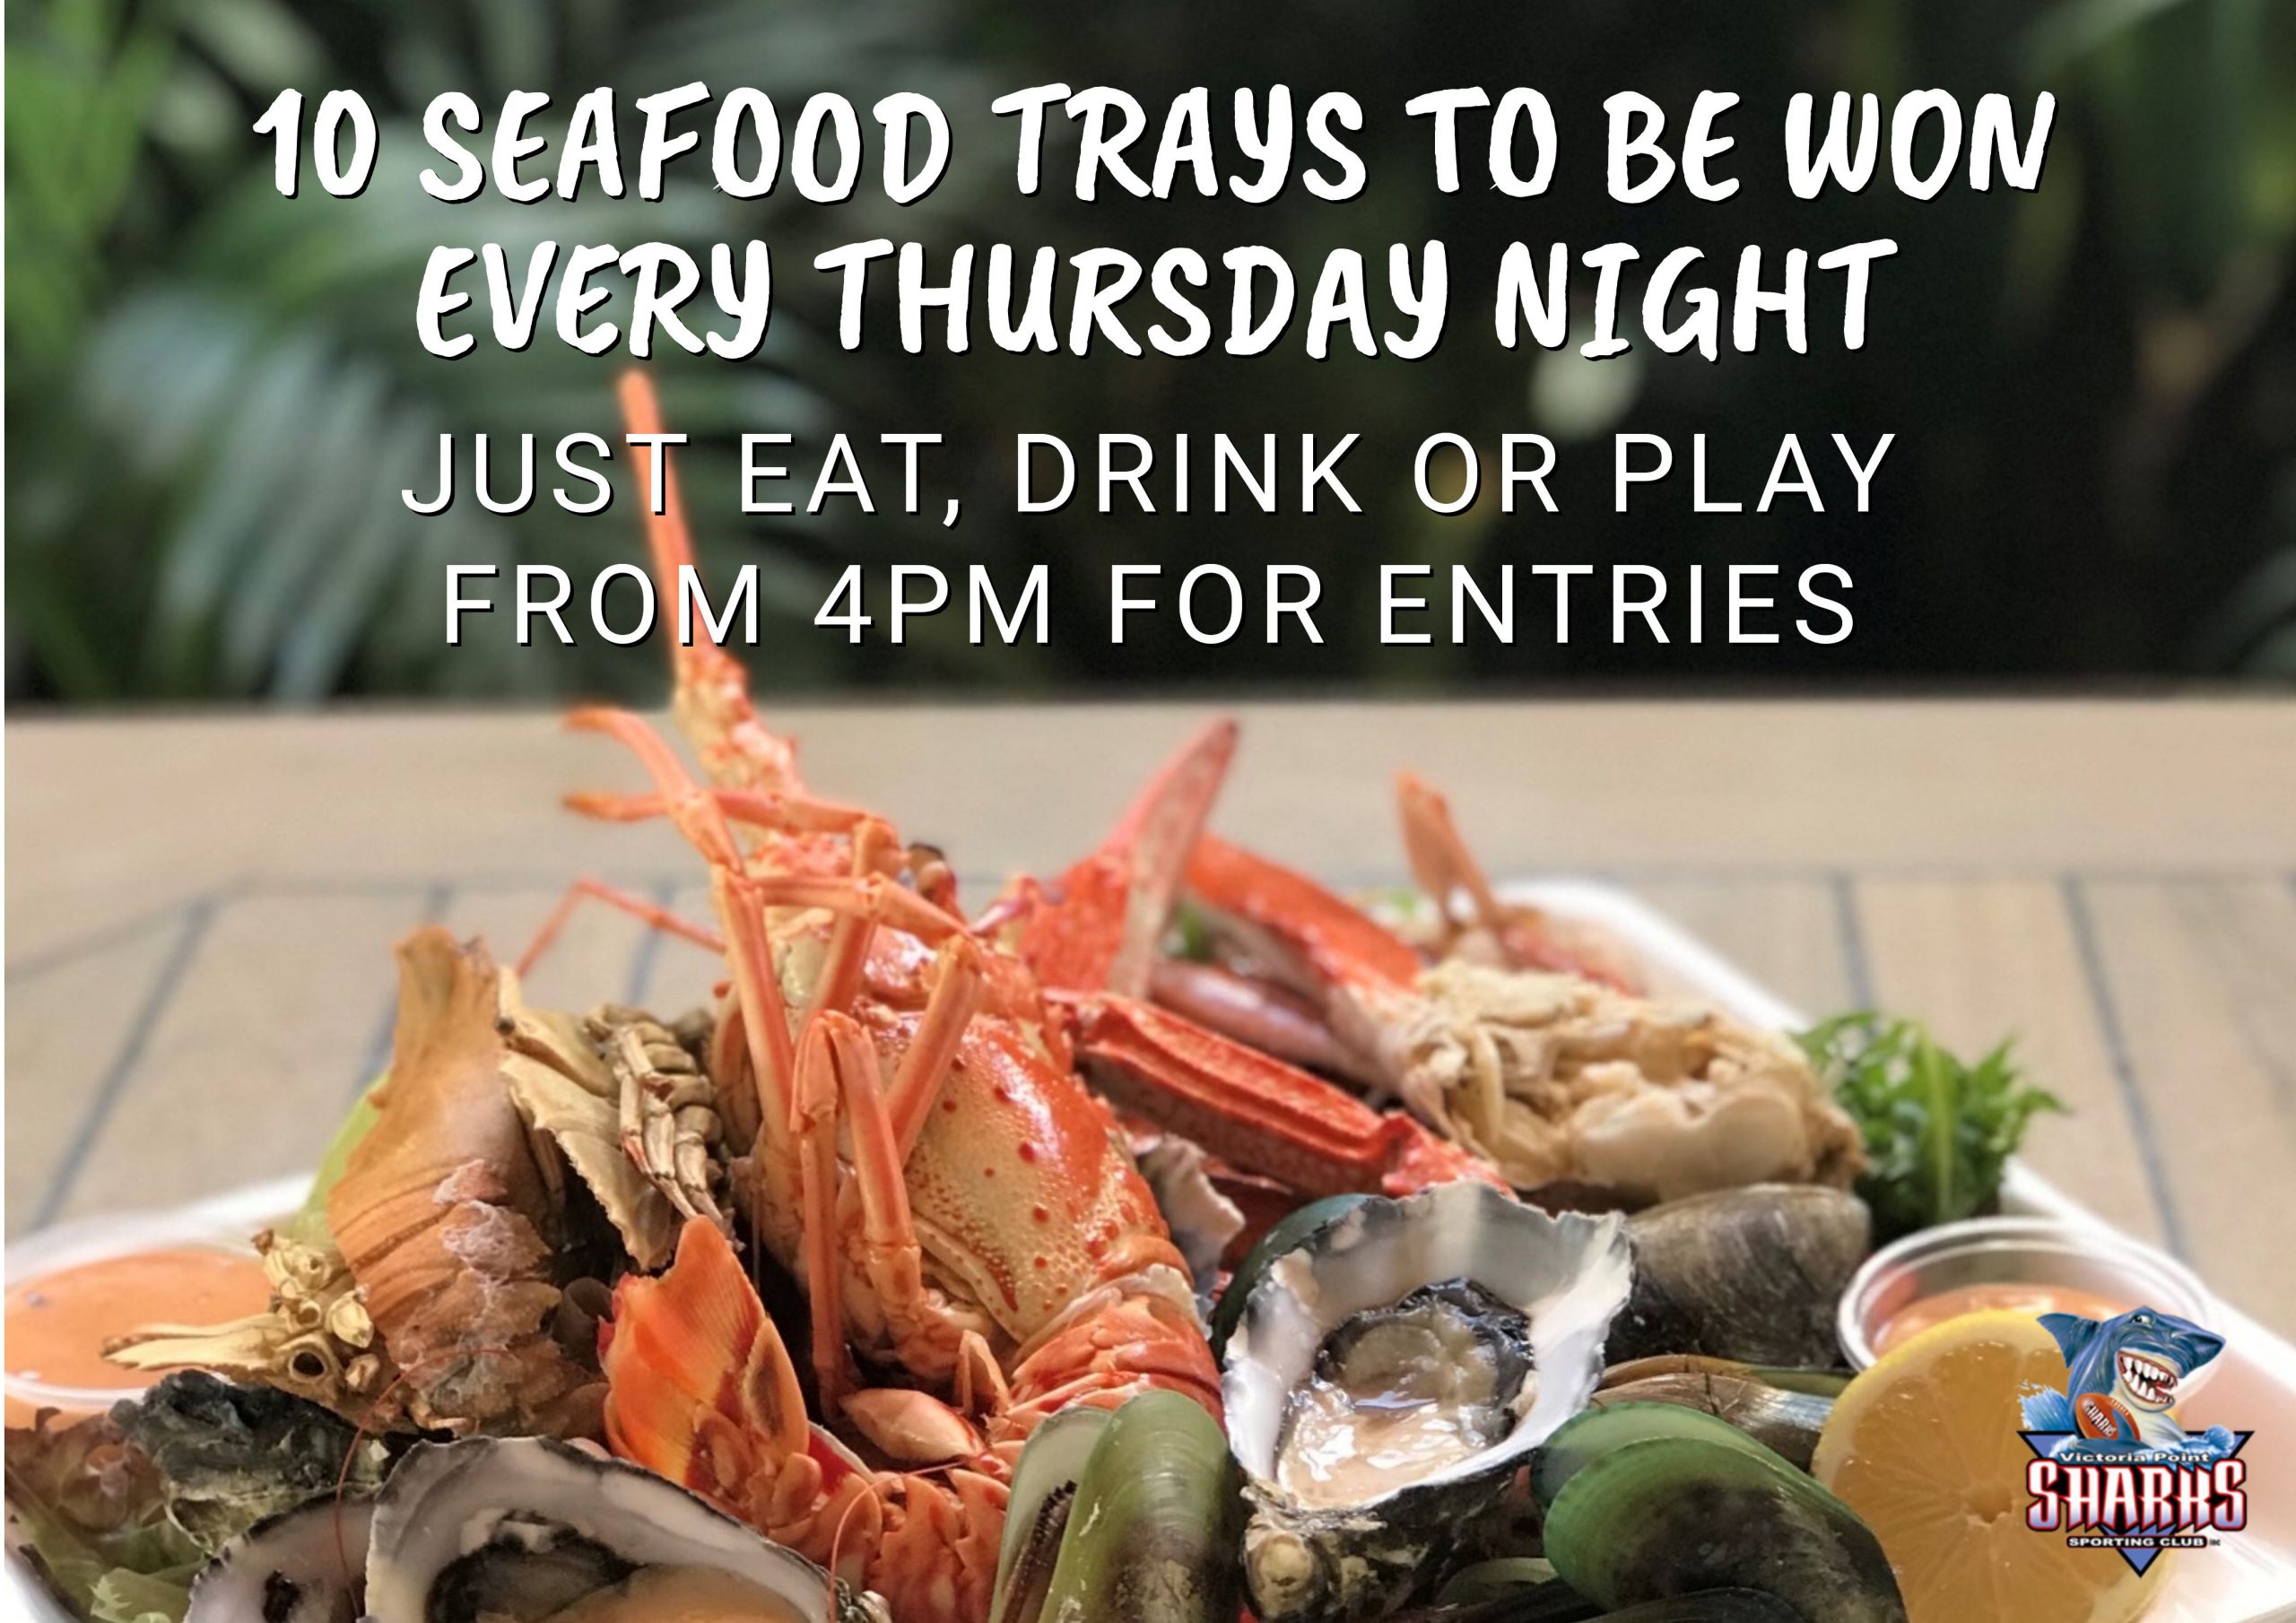 Seafood Tray Giveaway